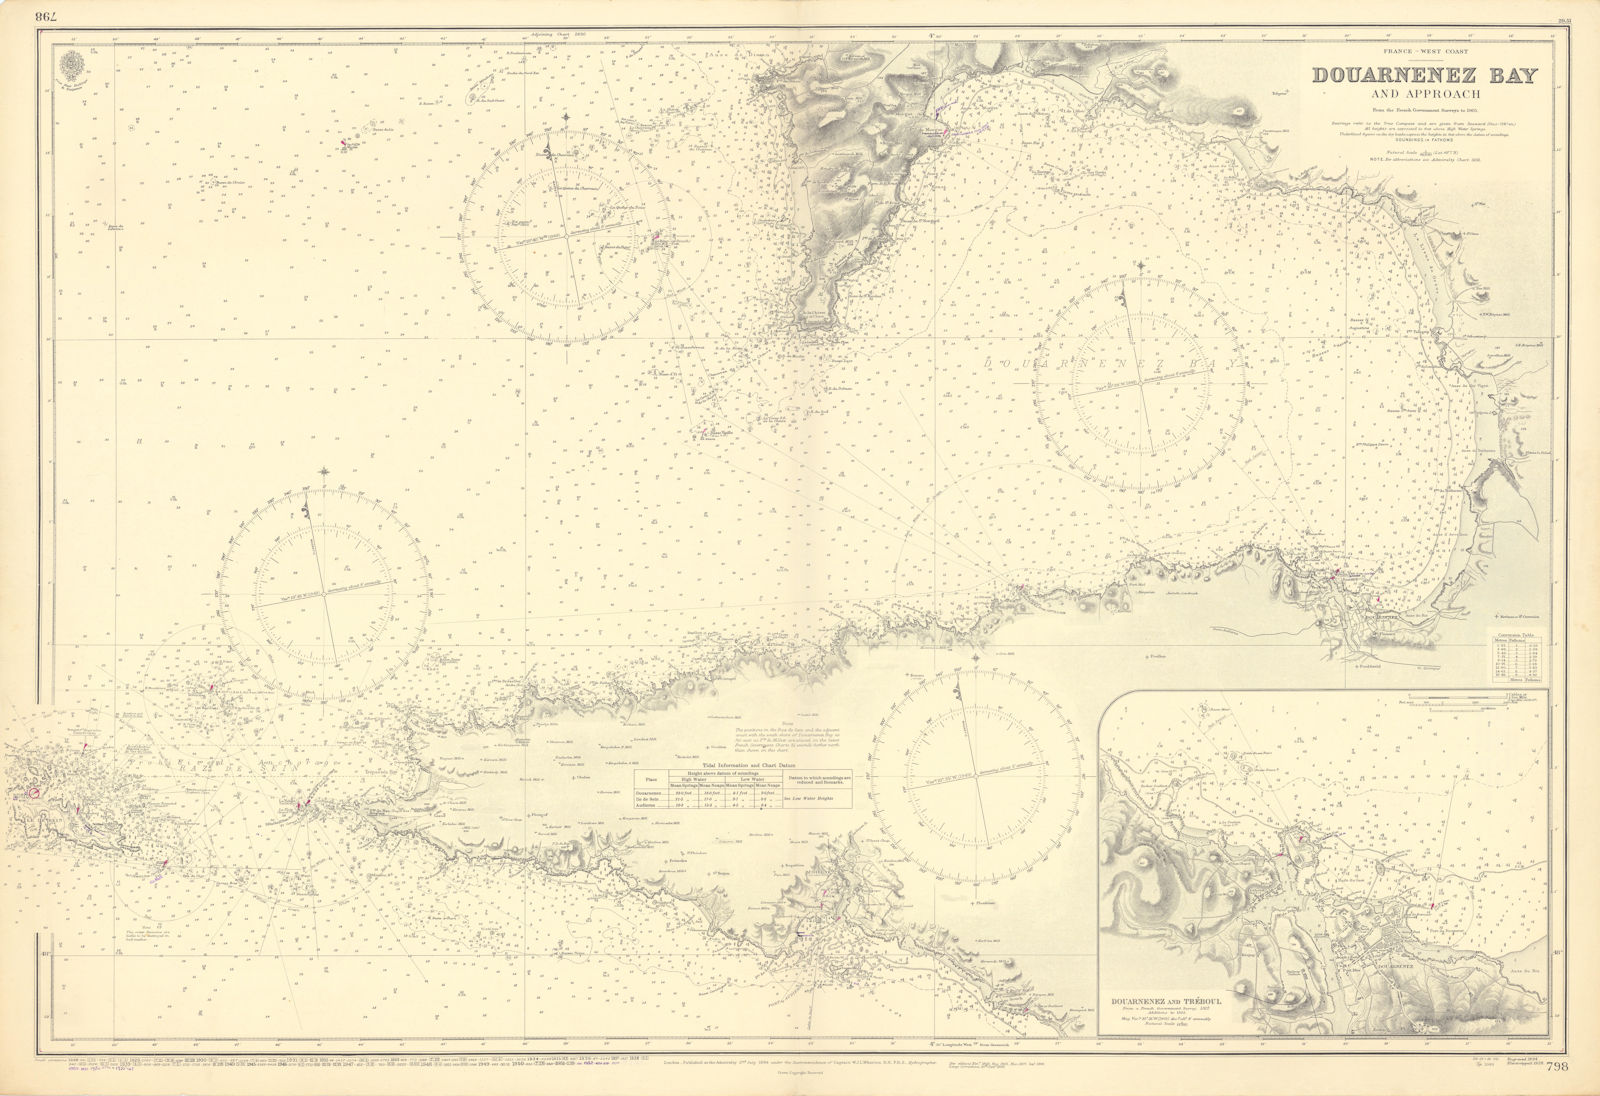 Douarnenez Bay & approach. Finistère France. ADMIRALTY sea chart 1894 (1955) map